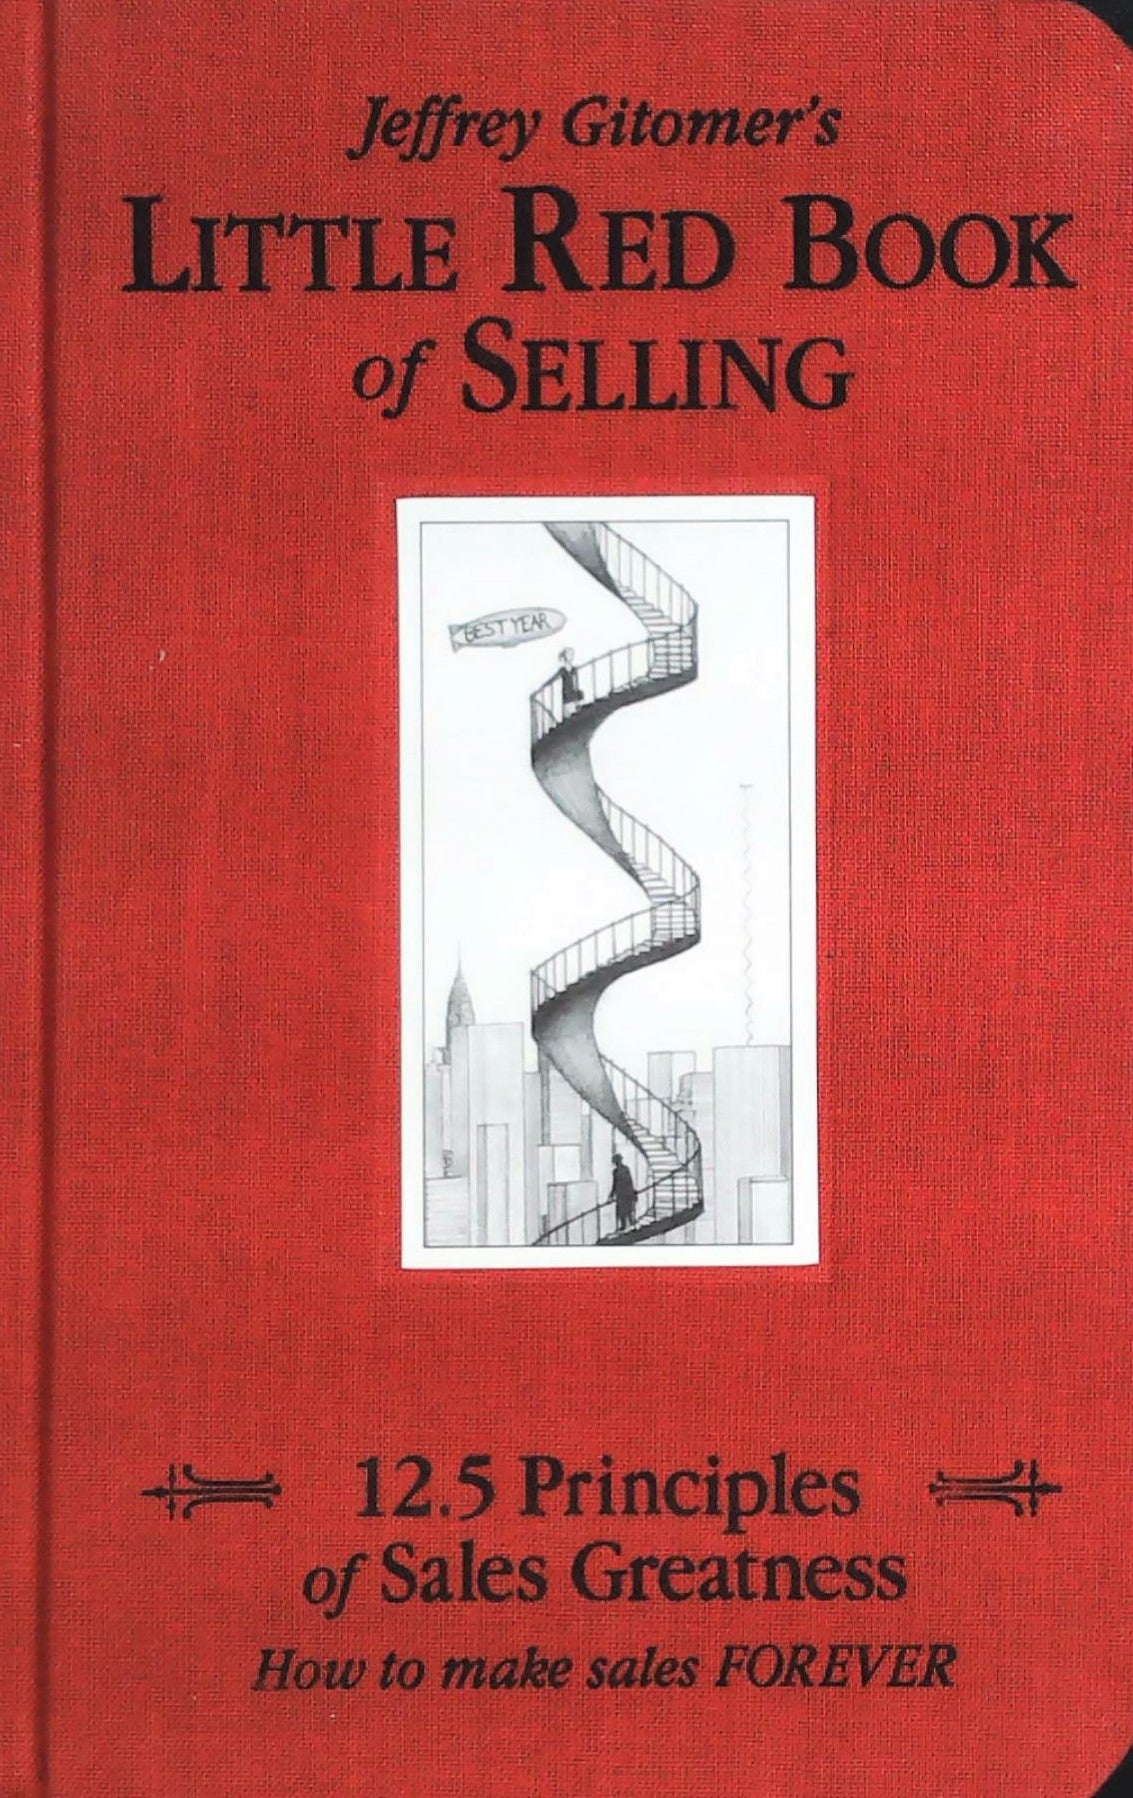 Little Red Book of Selling - Jeffrey Gitomer's